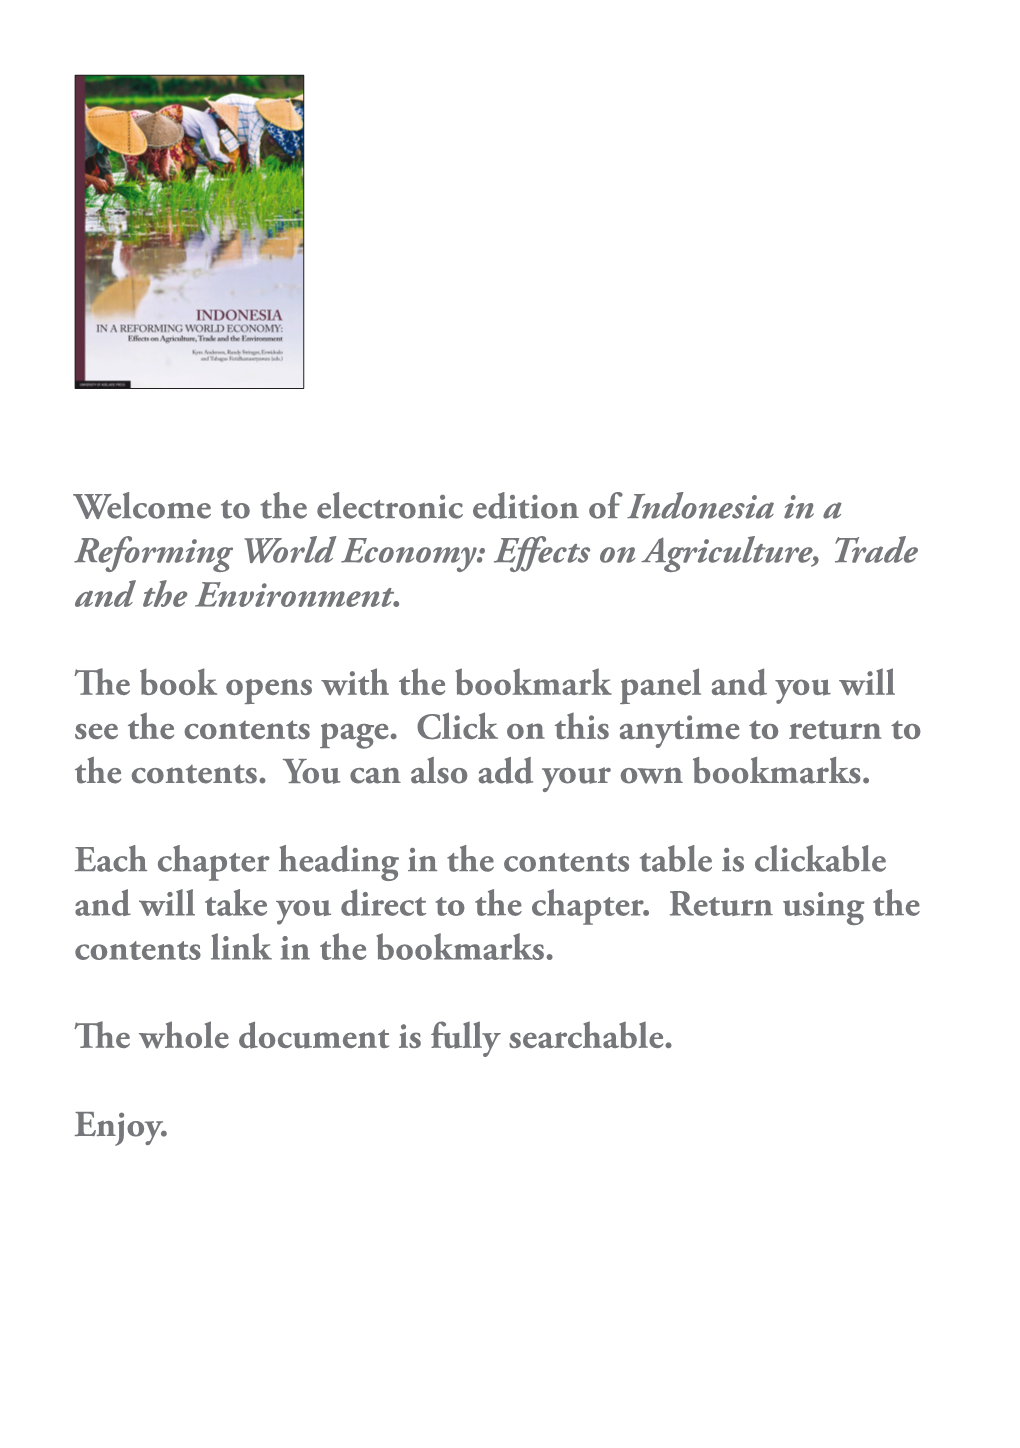 The Electronic Edition of Indonesia in a Reforming World Economy: Effects on Agriculture, Trade and the Environment